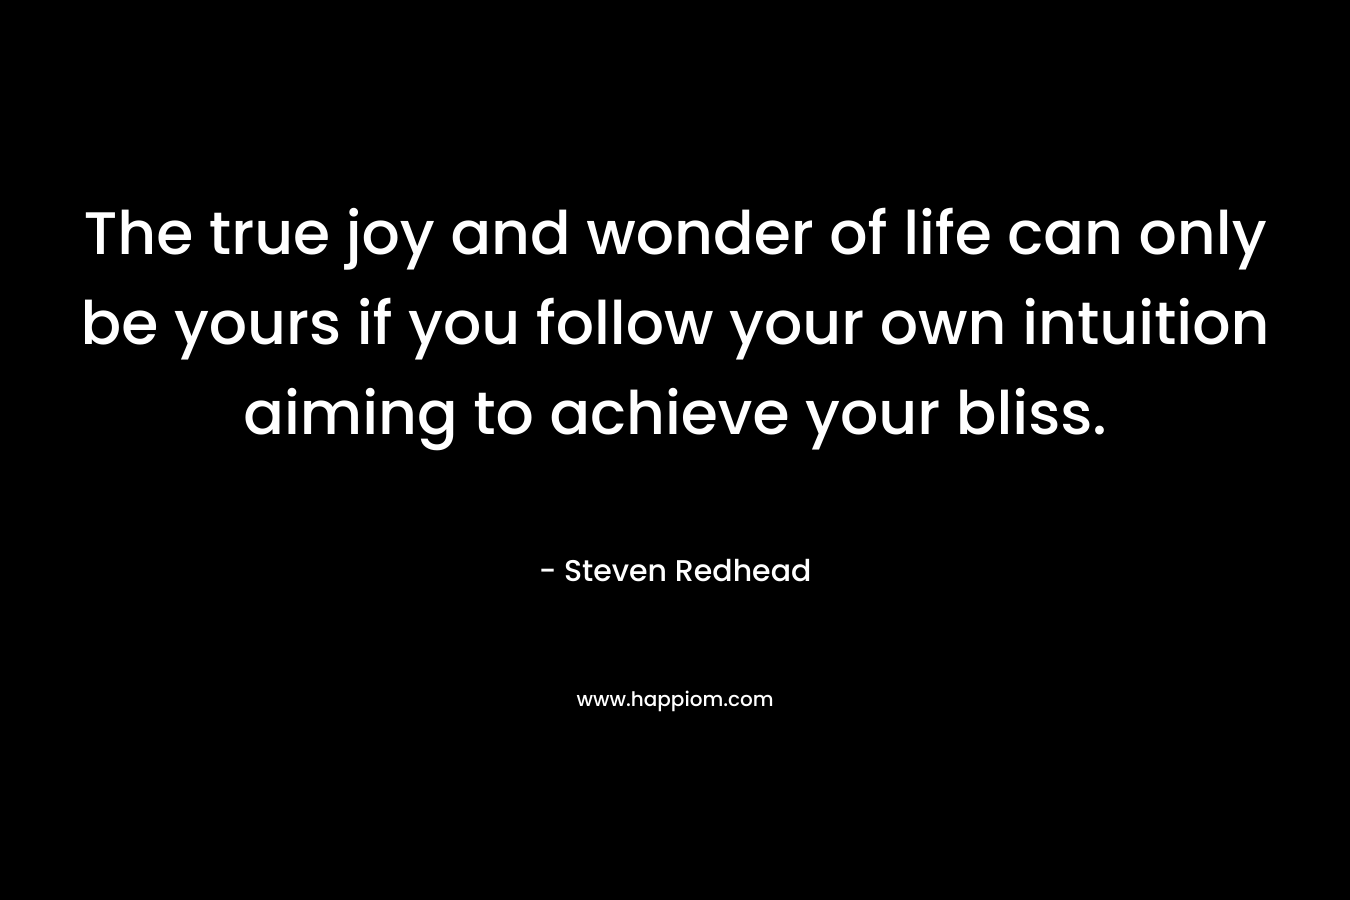 The true joy and wonder of life can only be yours if you follow your own intuition aiming to achieve your bliss. – Steven Redhead